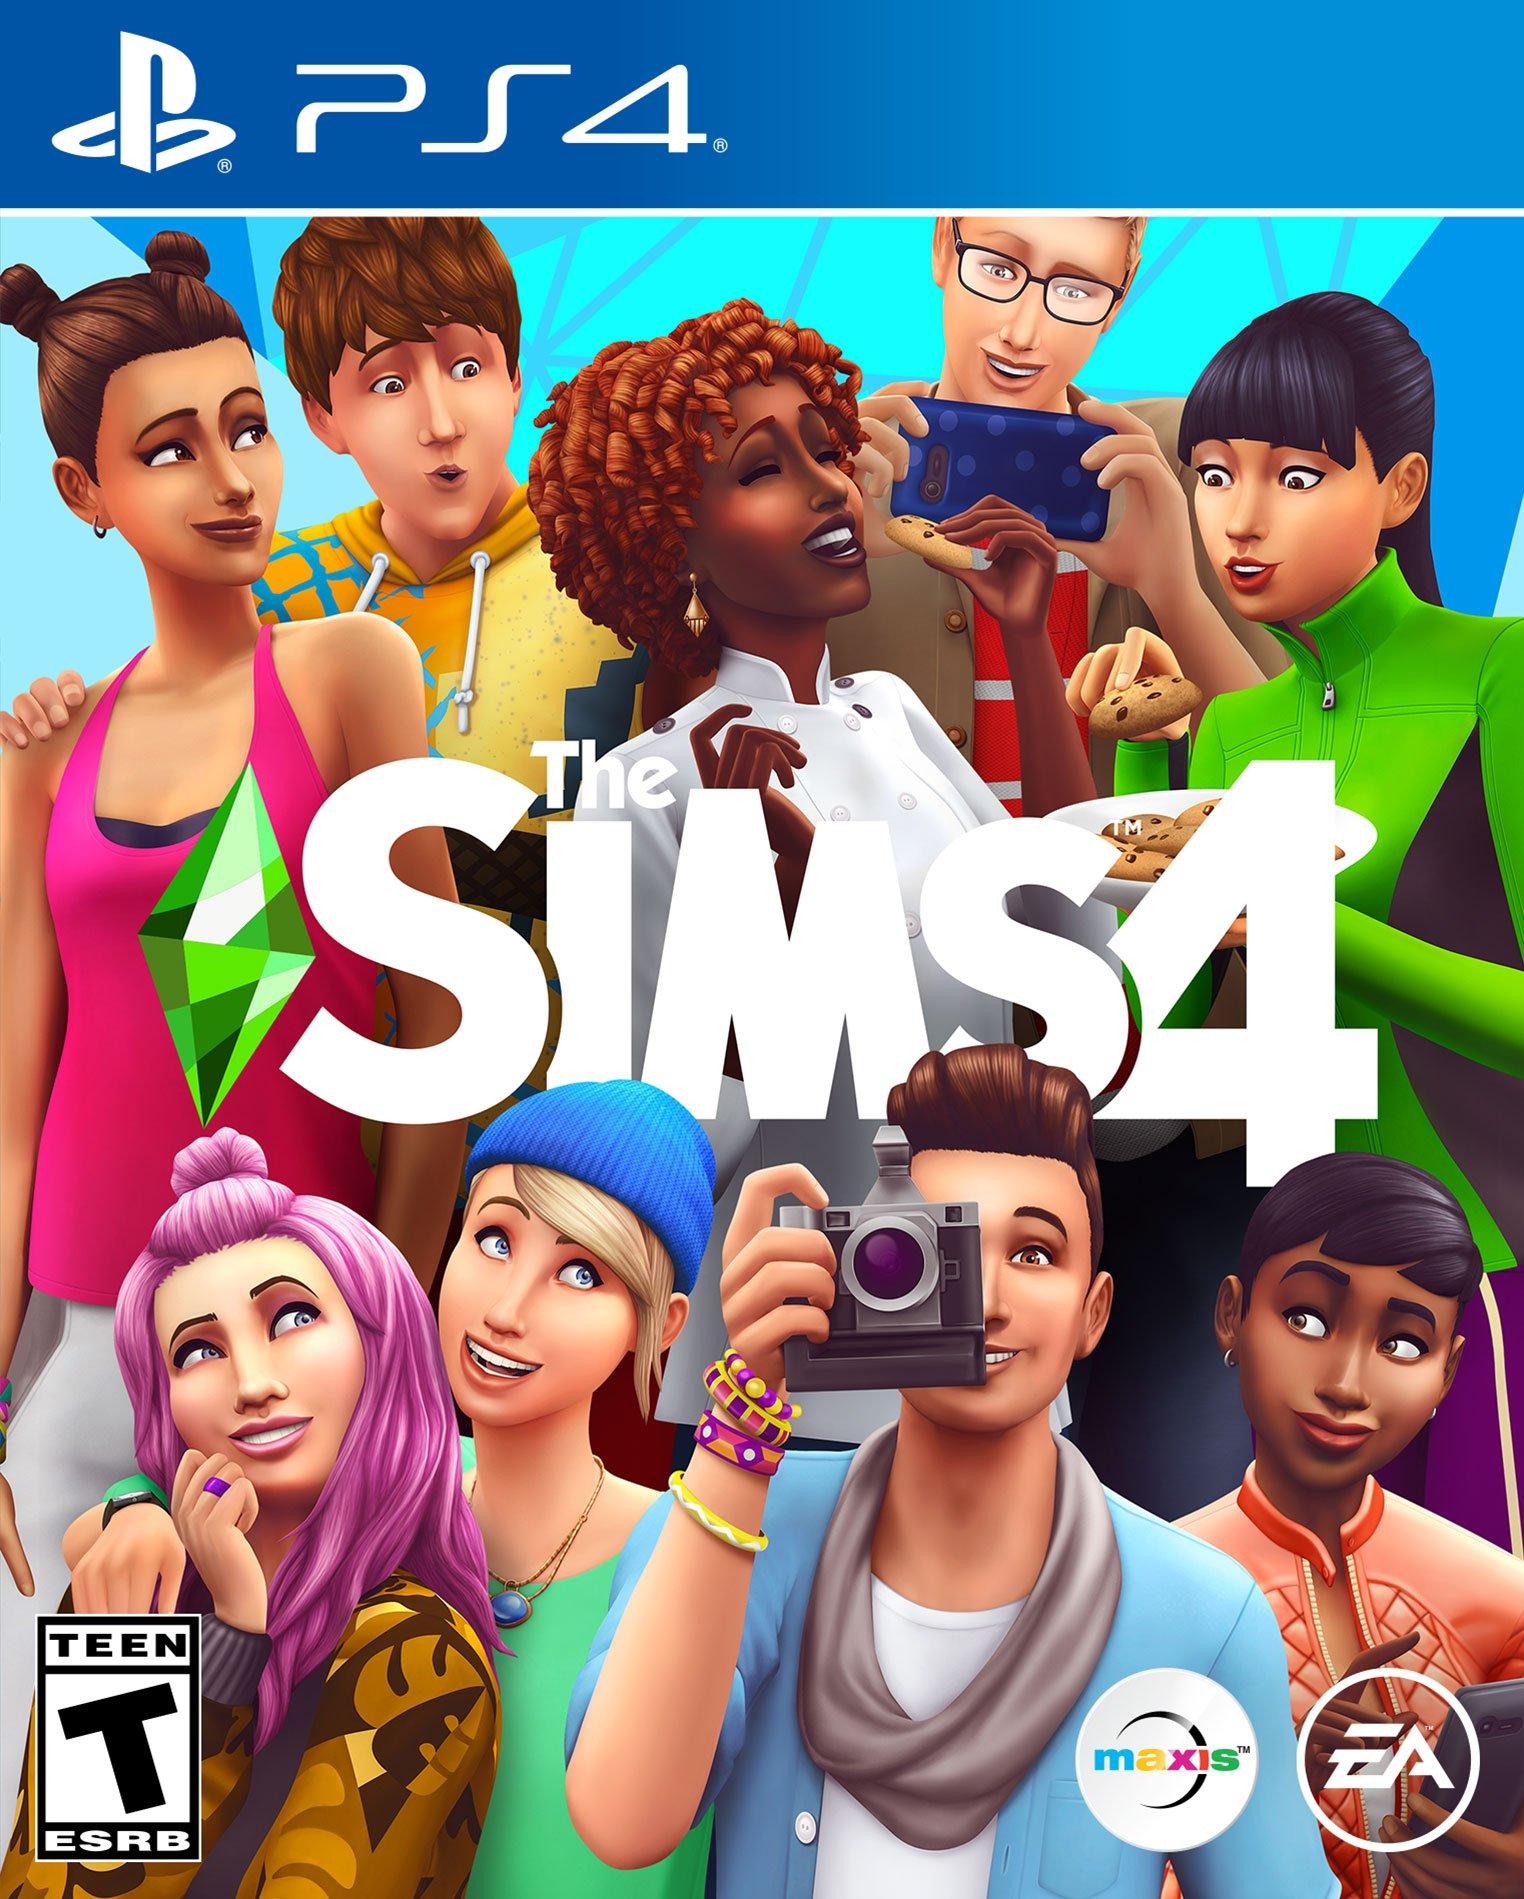 can you play sims 4 on ps3